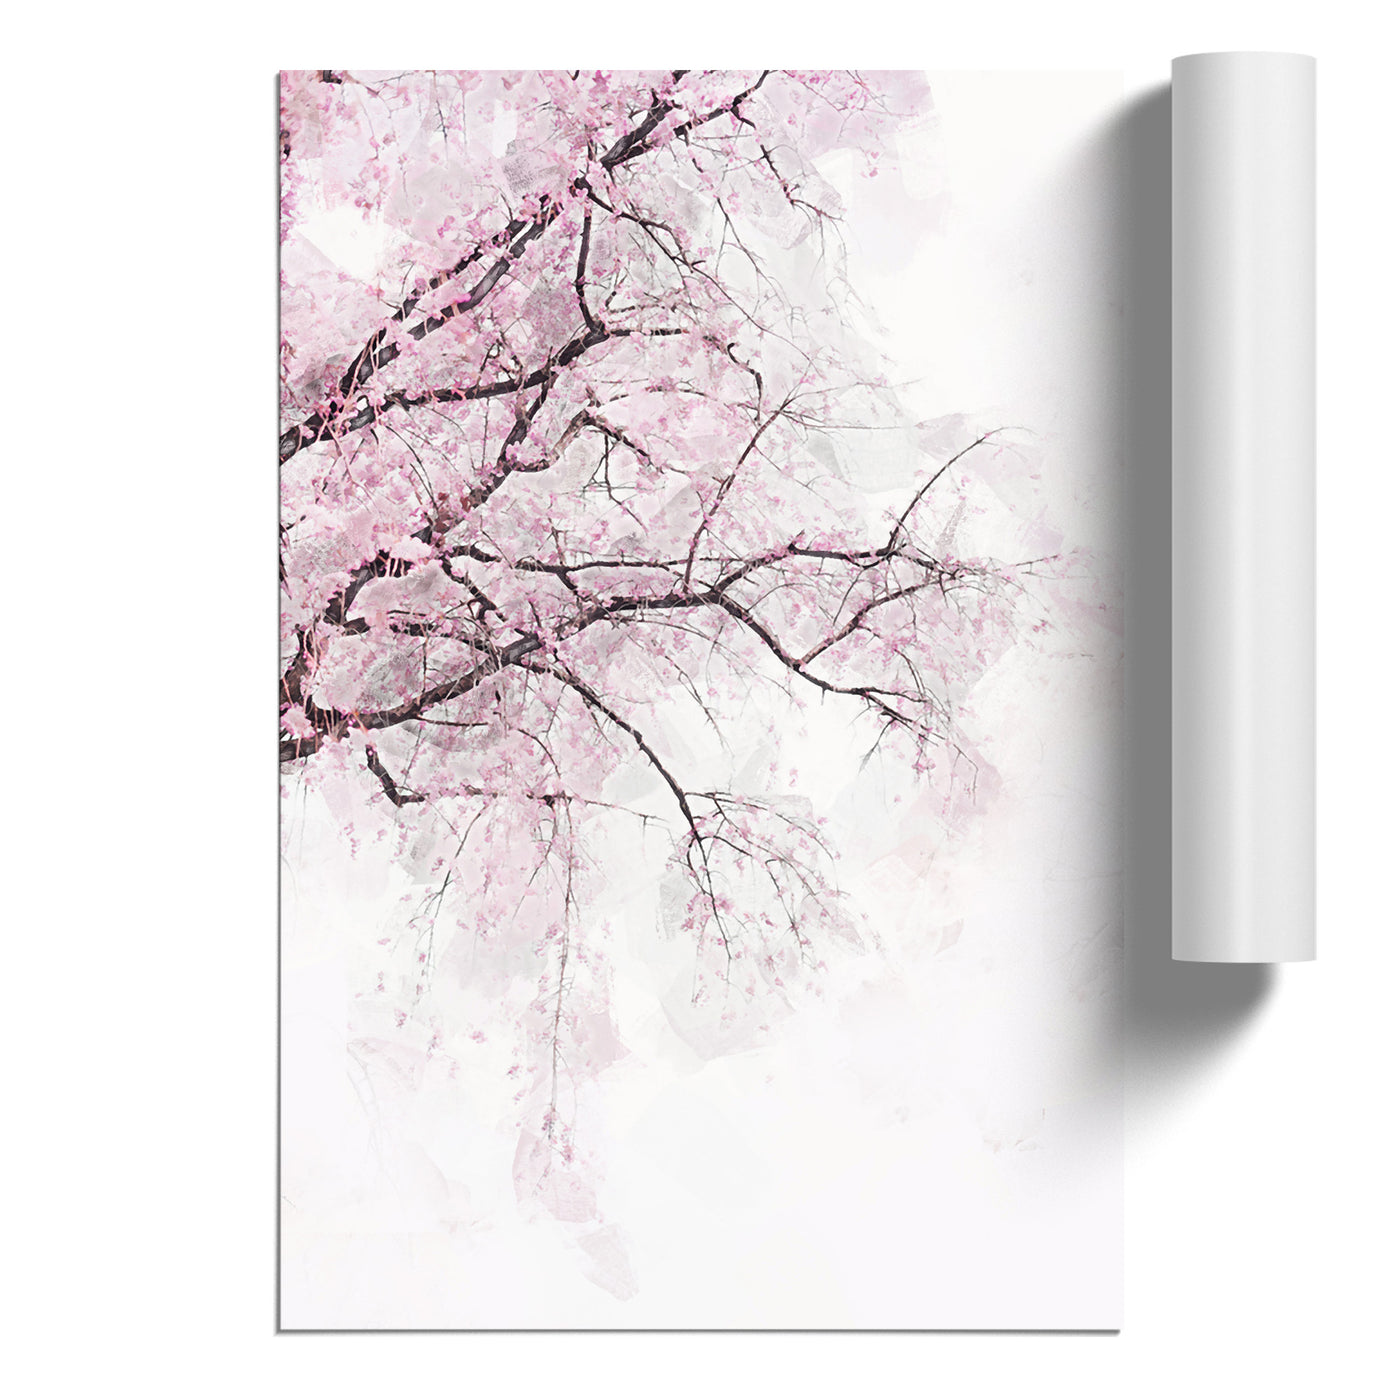 A Pink Cherry Blossom Tree Abstract Art